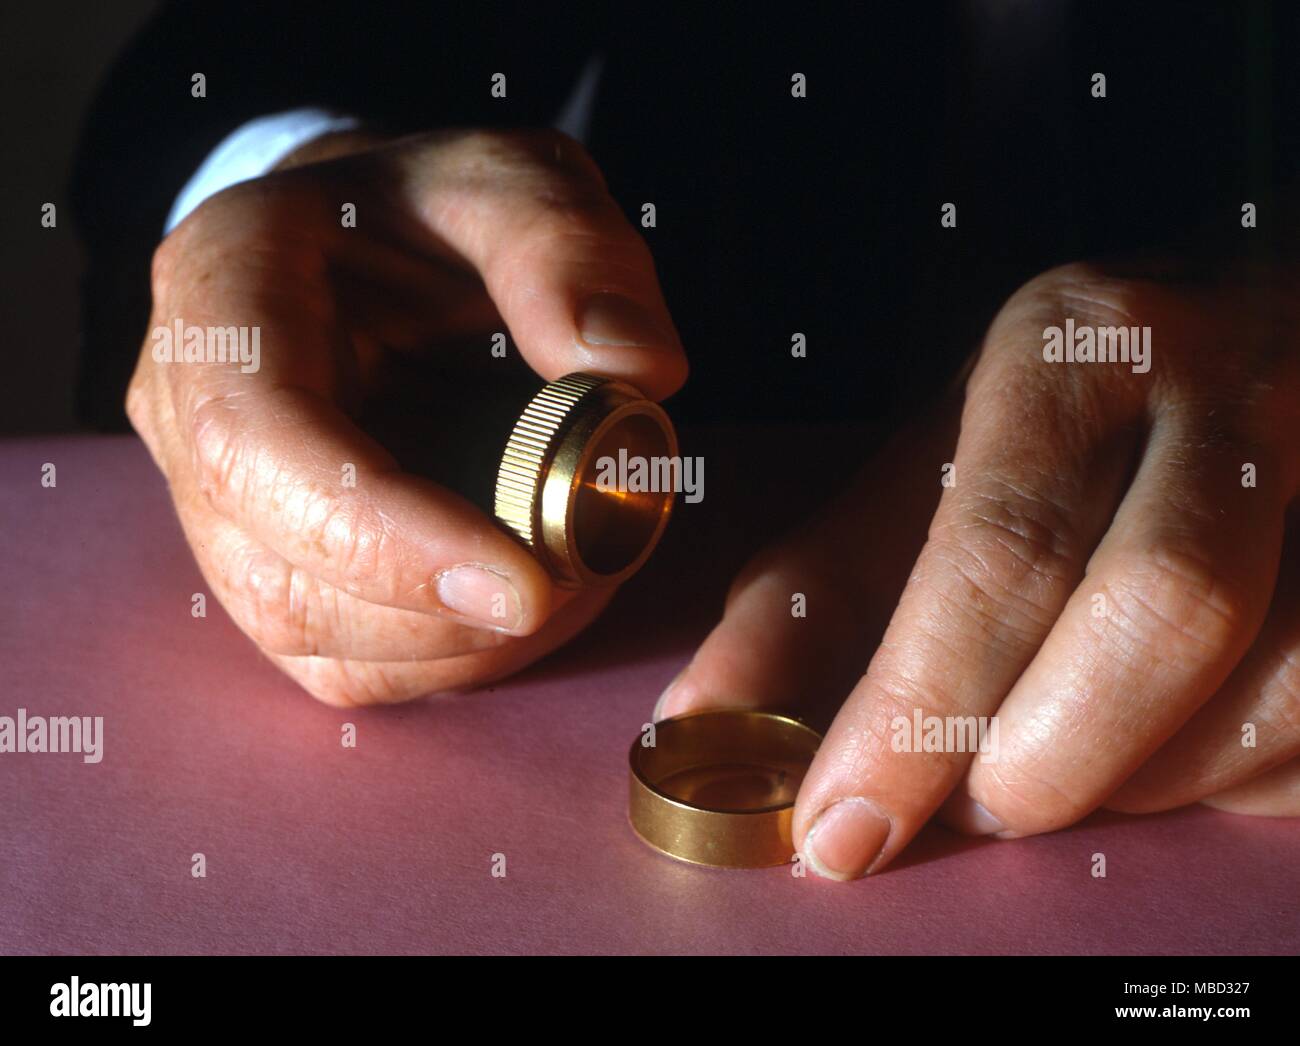 Stage Magic - Marvin's Magical Coins. Magician prepares to make coins reappear. Stock Photo